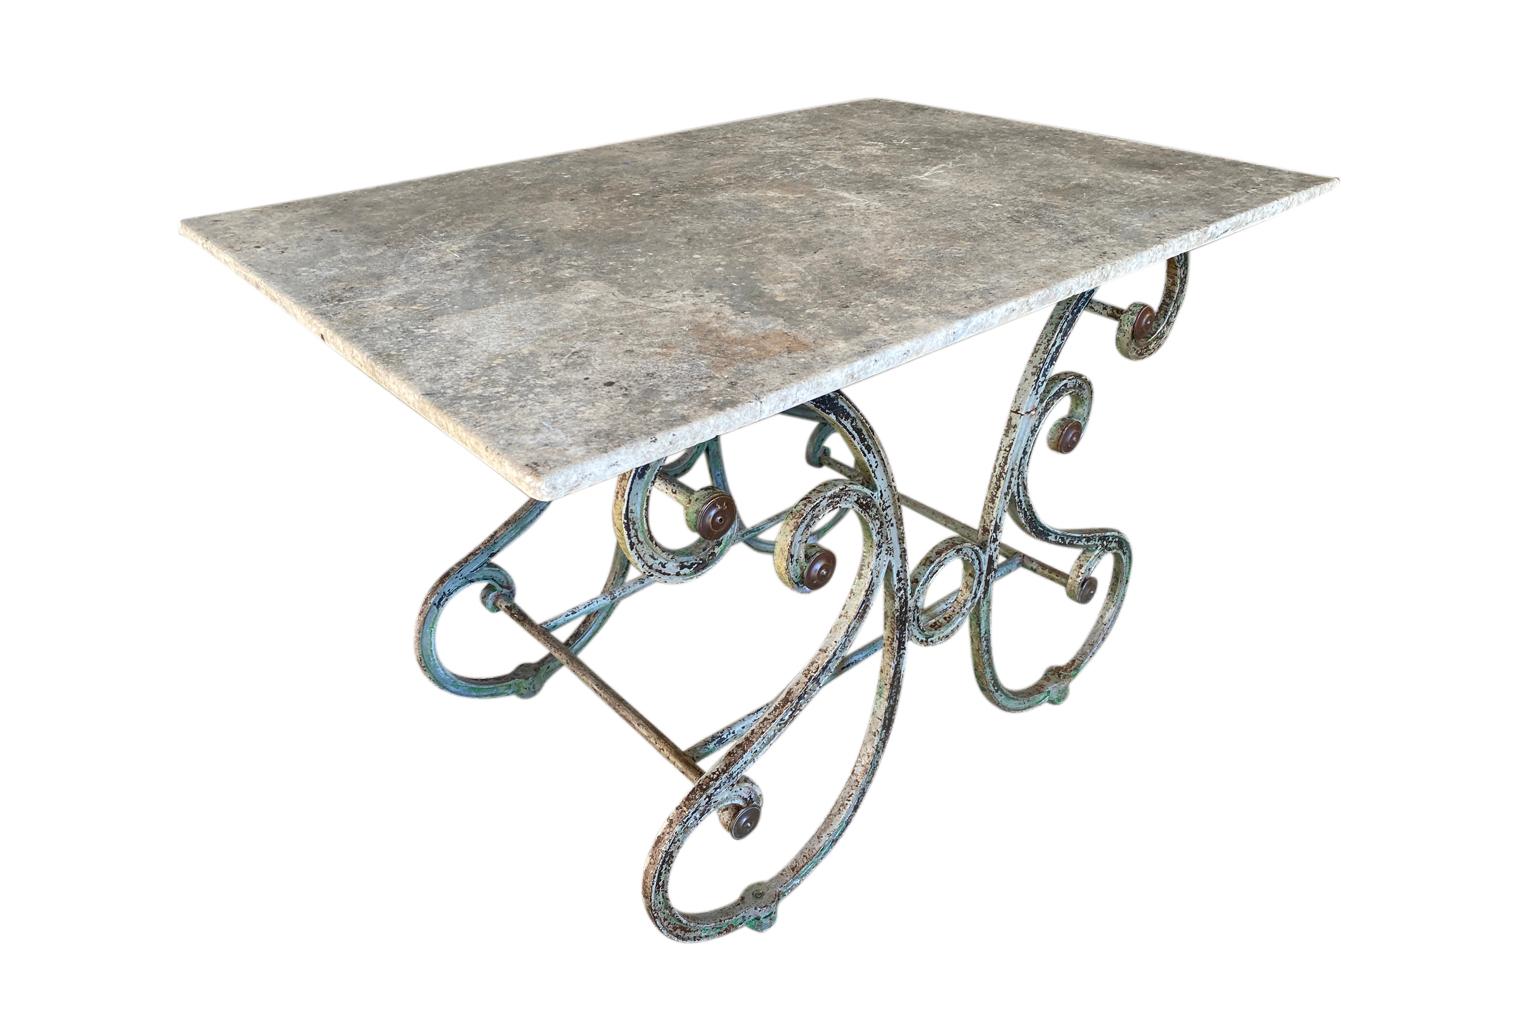 A wonderful later 19th century Butcher's Table from the South of France. Beautifully constructed in the Papillon style - butterfly - with a cast iron base and its original marble top. Tables such as this one, were originally used in the vitrine of a